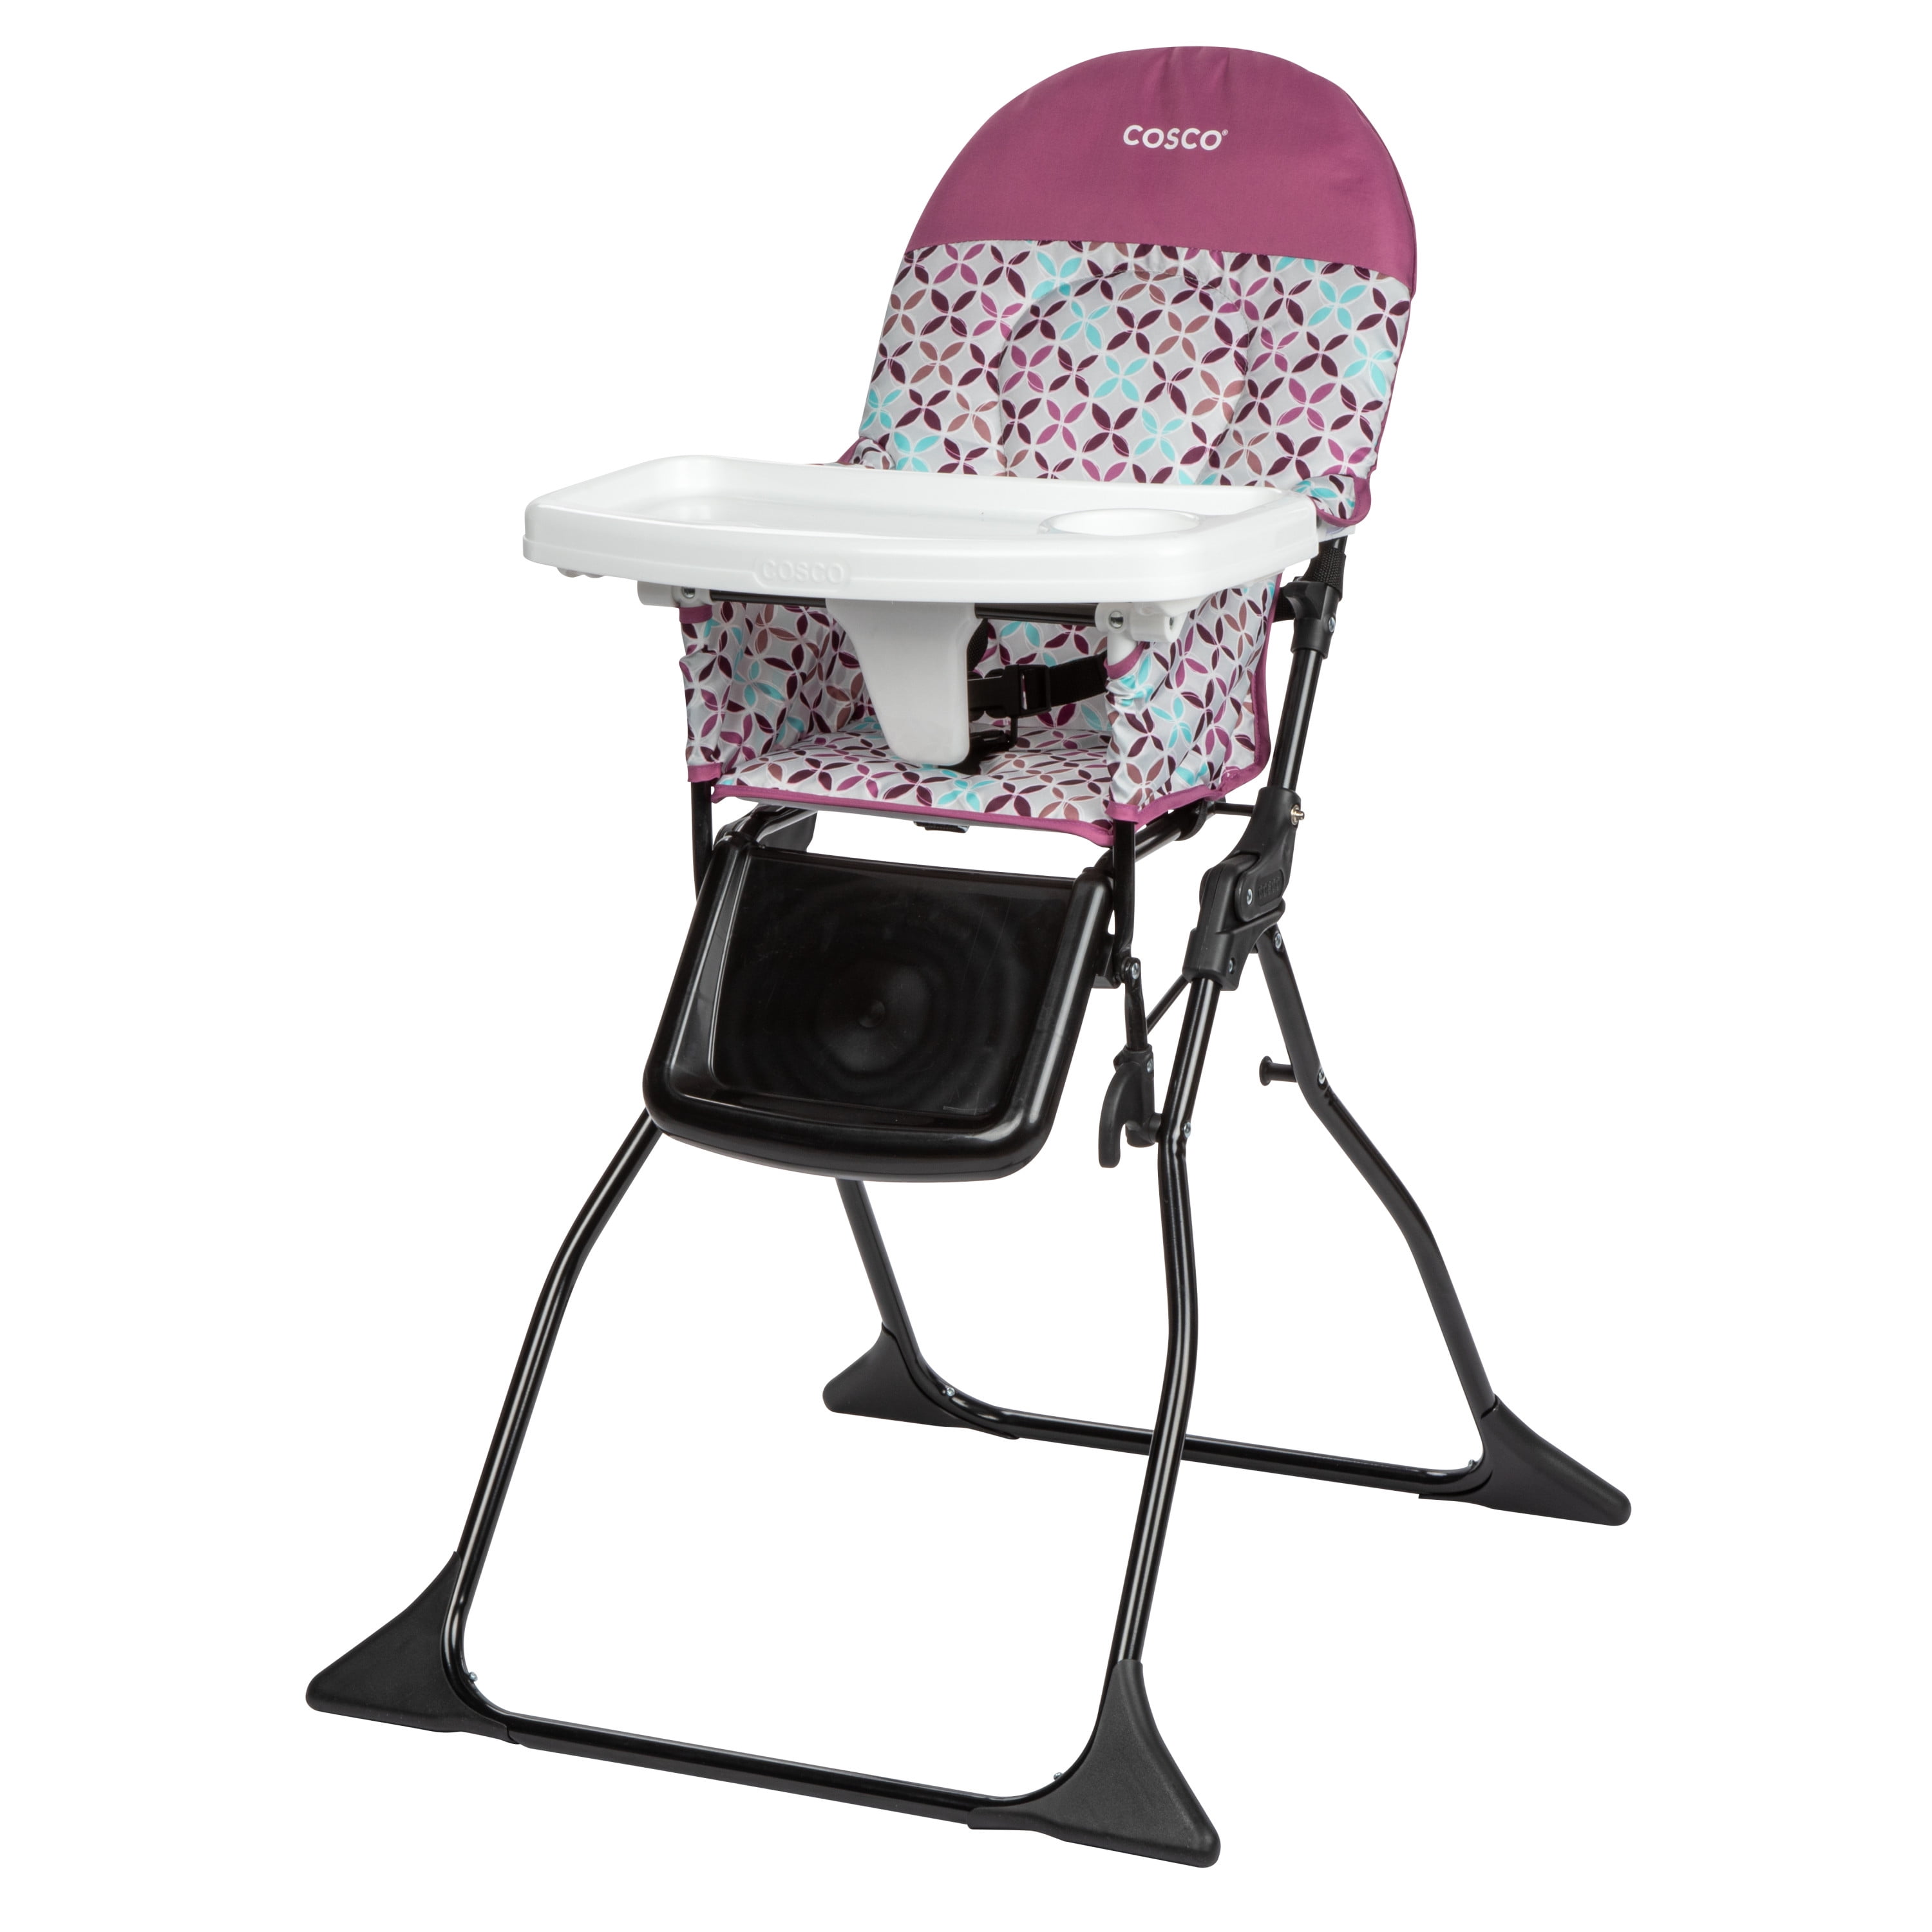 COSCO SIMPLE FOLD HIGH CHAIR 3-position Adjustable Tray Multiple Colors 